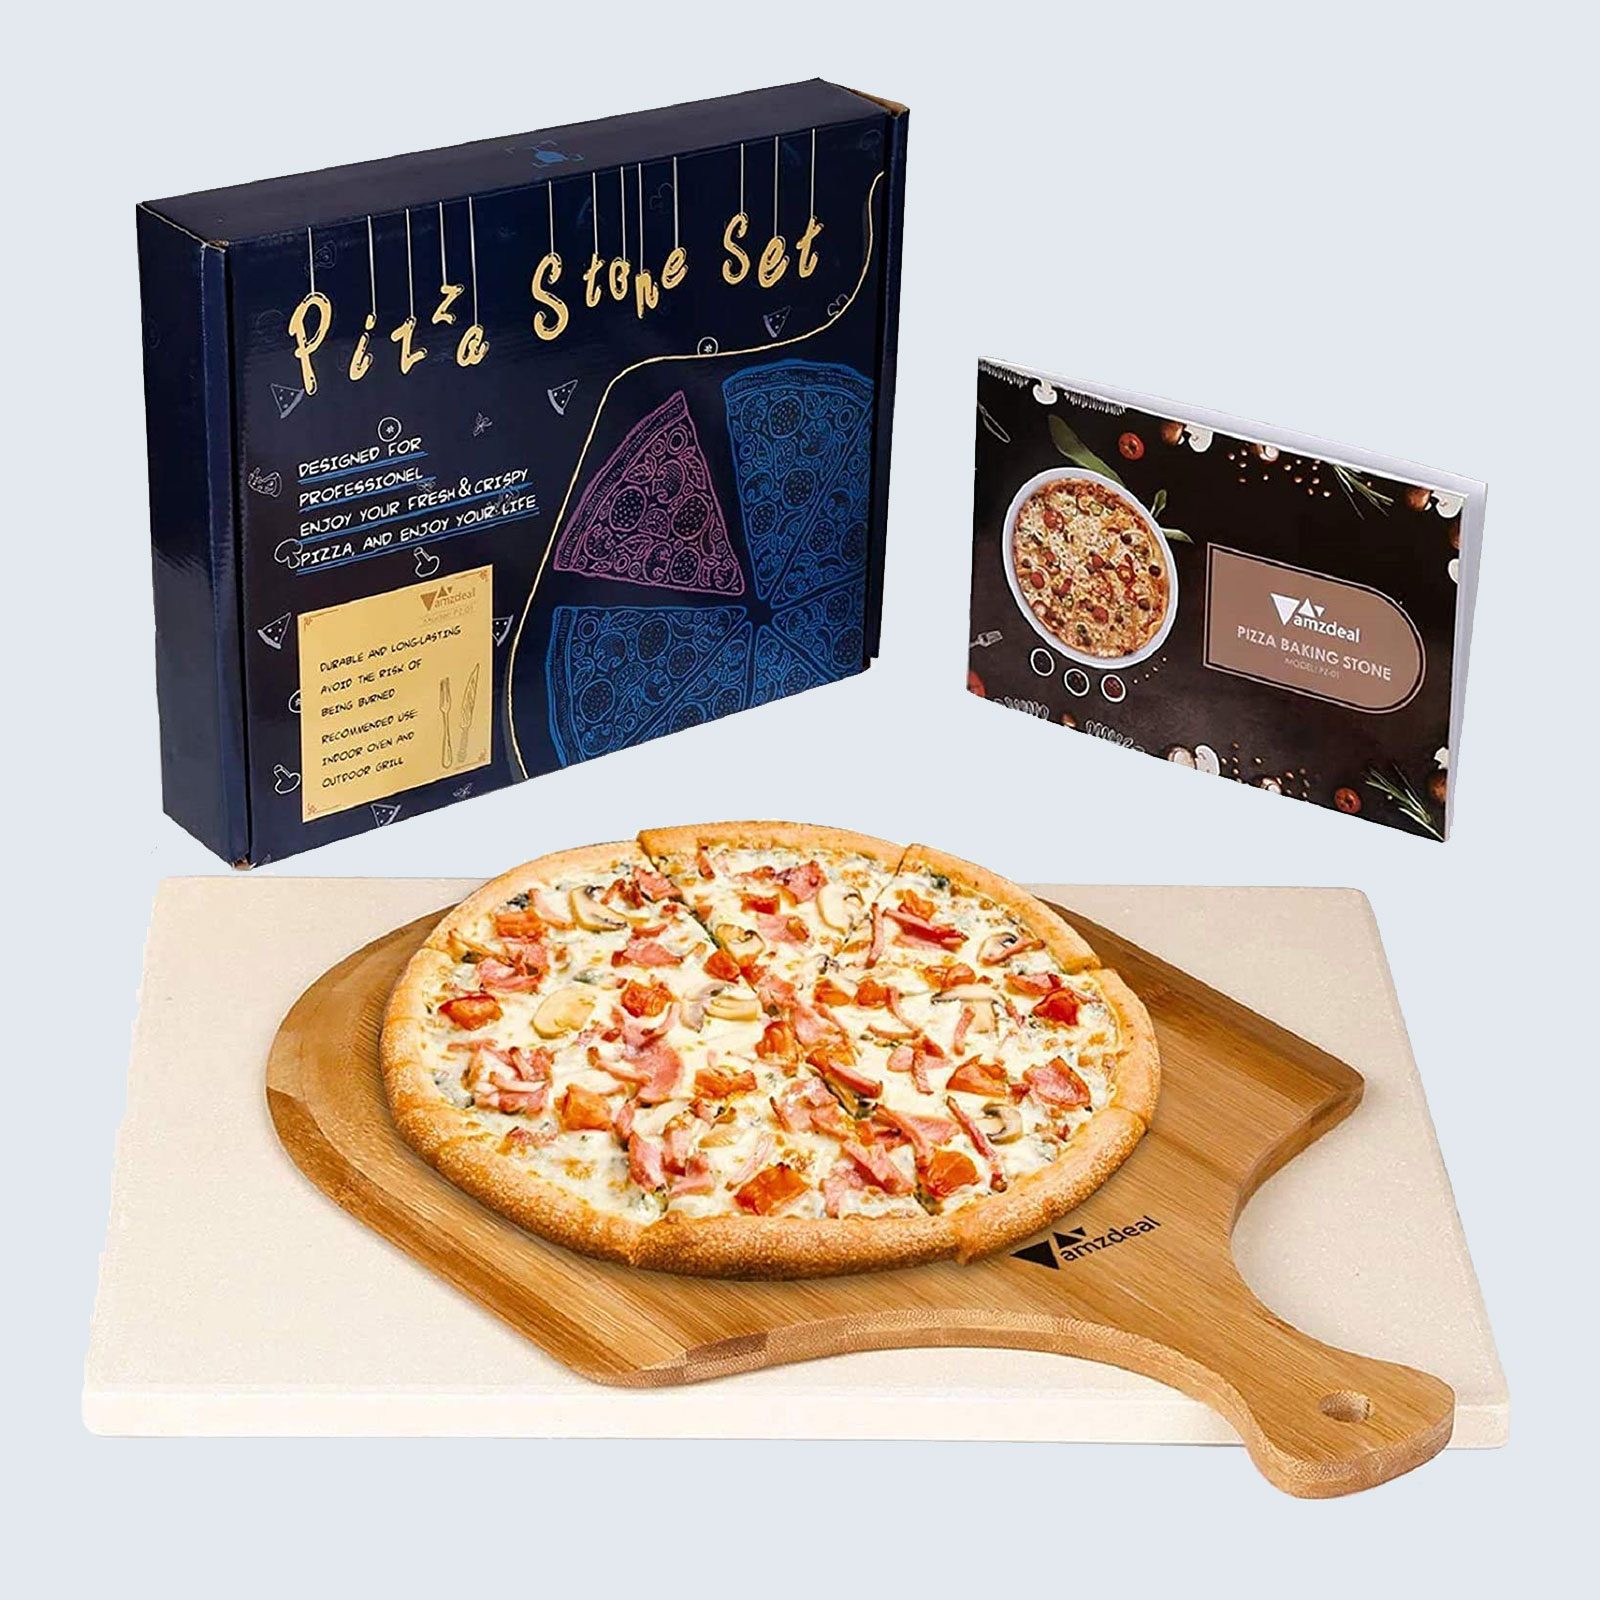 For the pizza fanatic: Amzdeal Pizza Stone Set